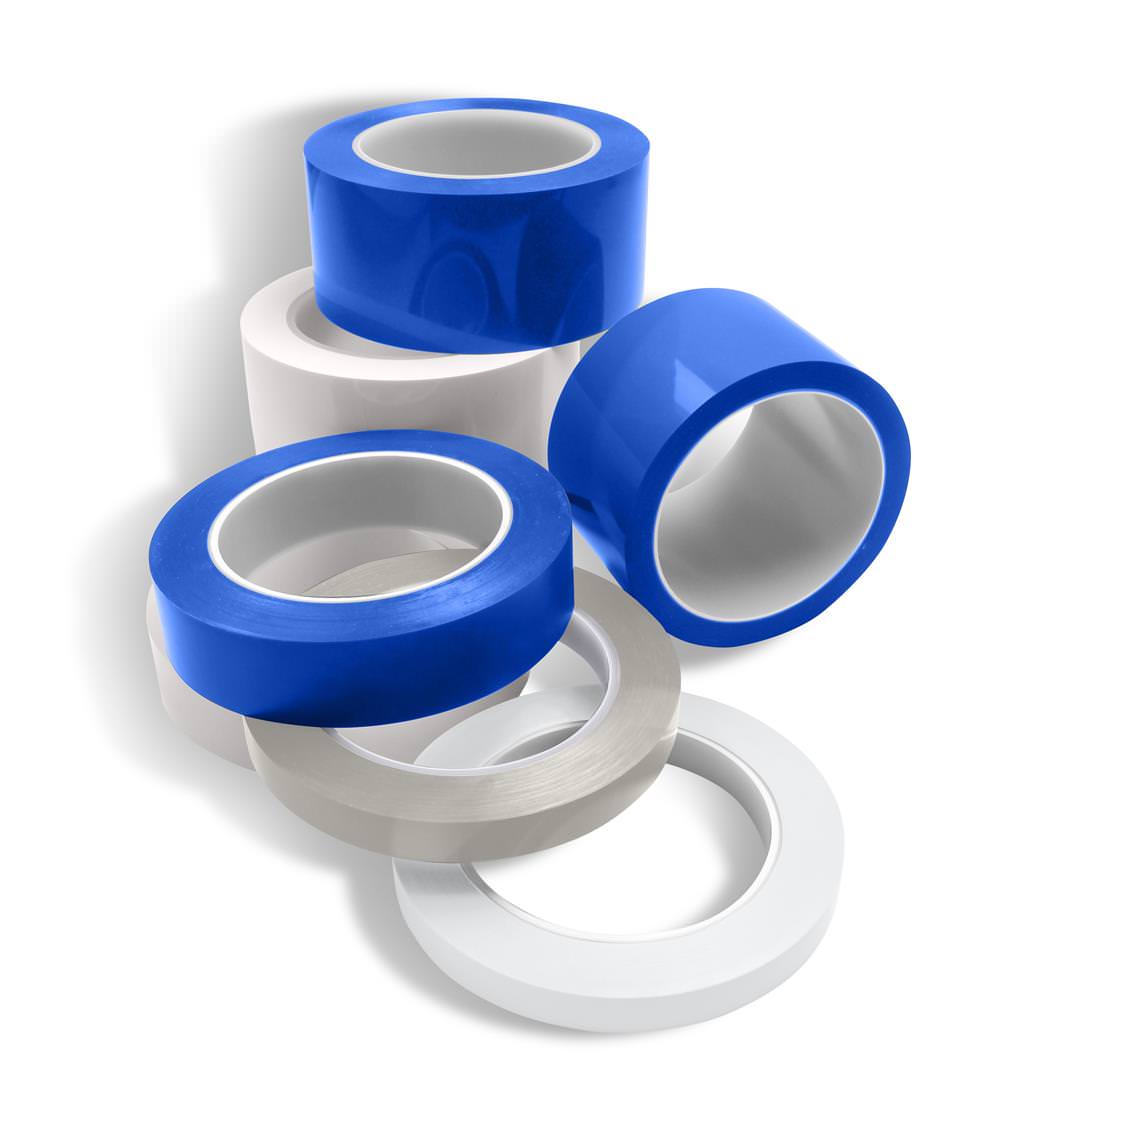 Texwipe Blue and White Cleanroom Adhesive Tapes